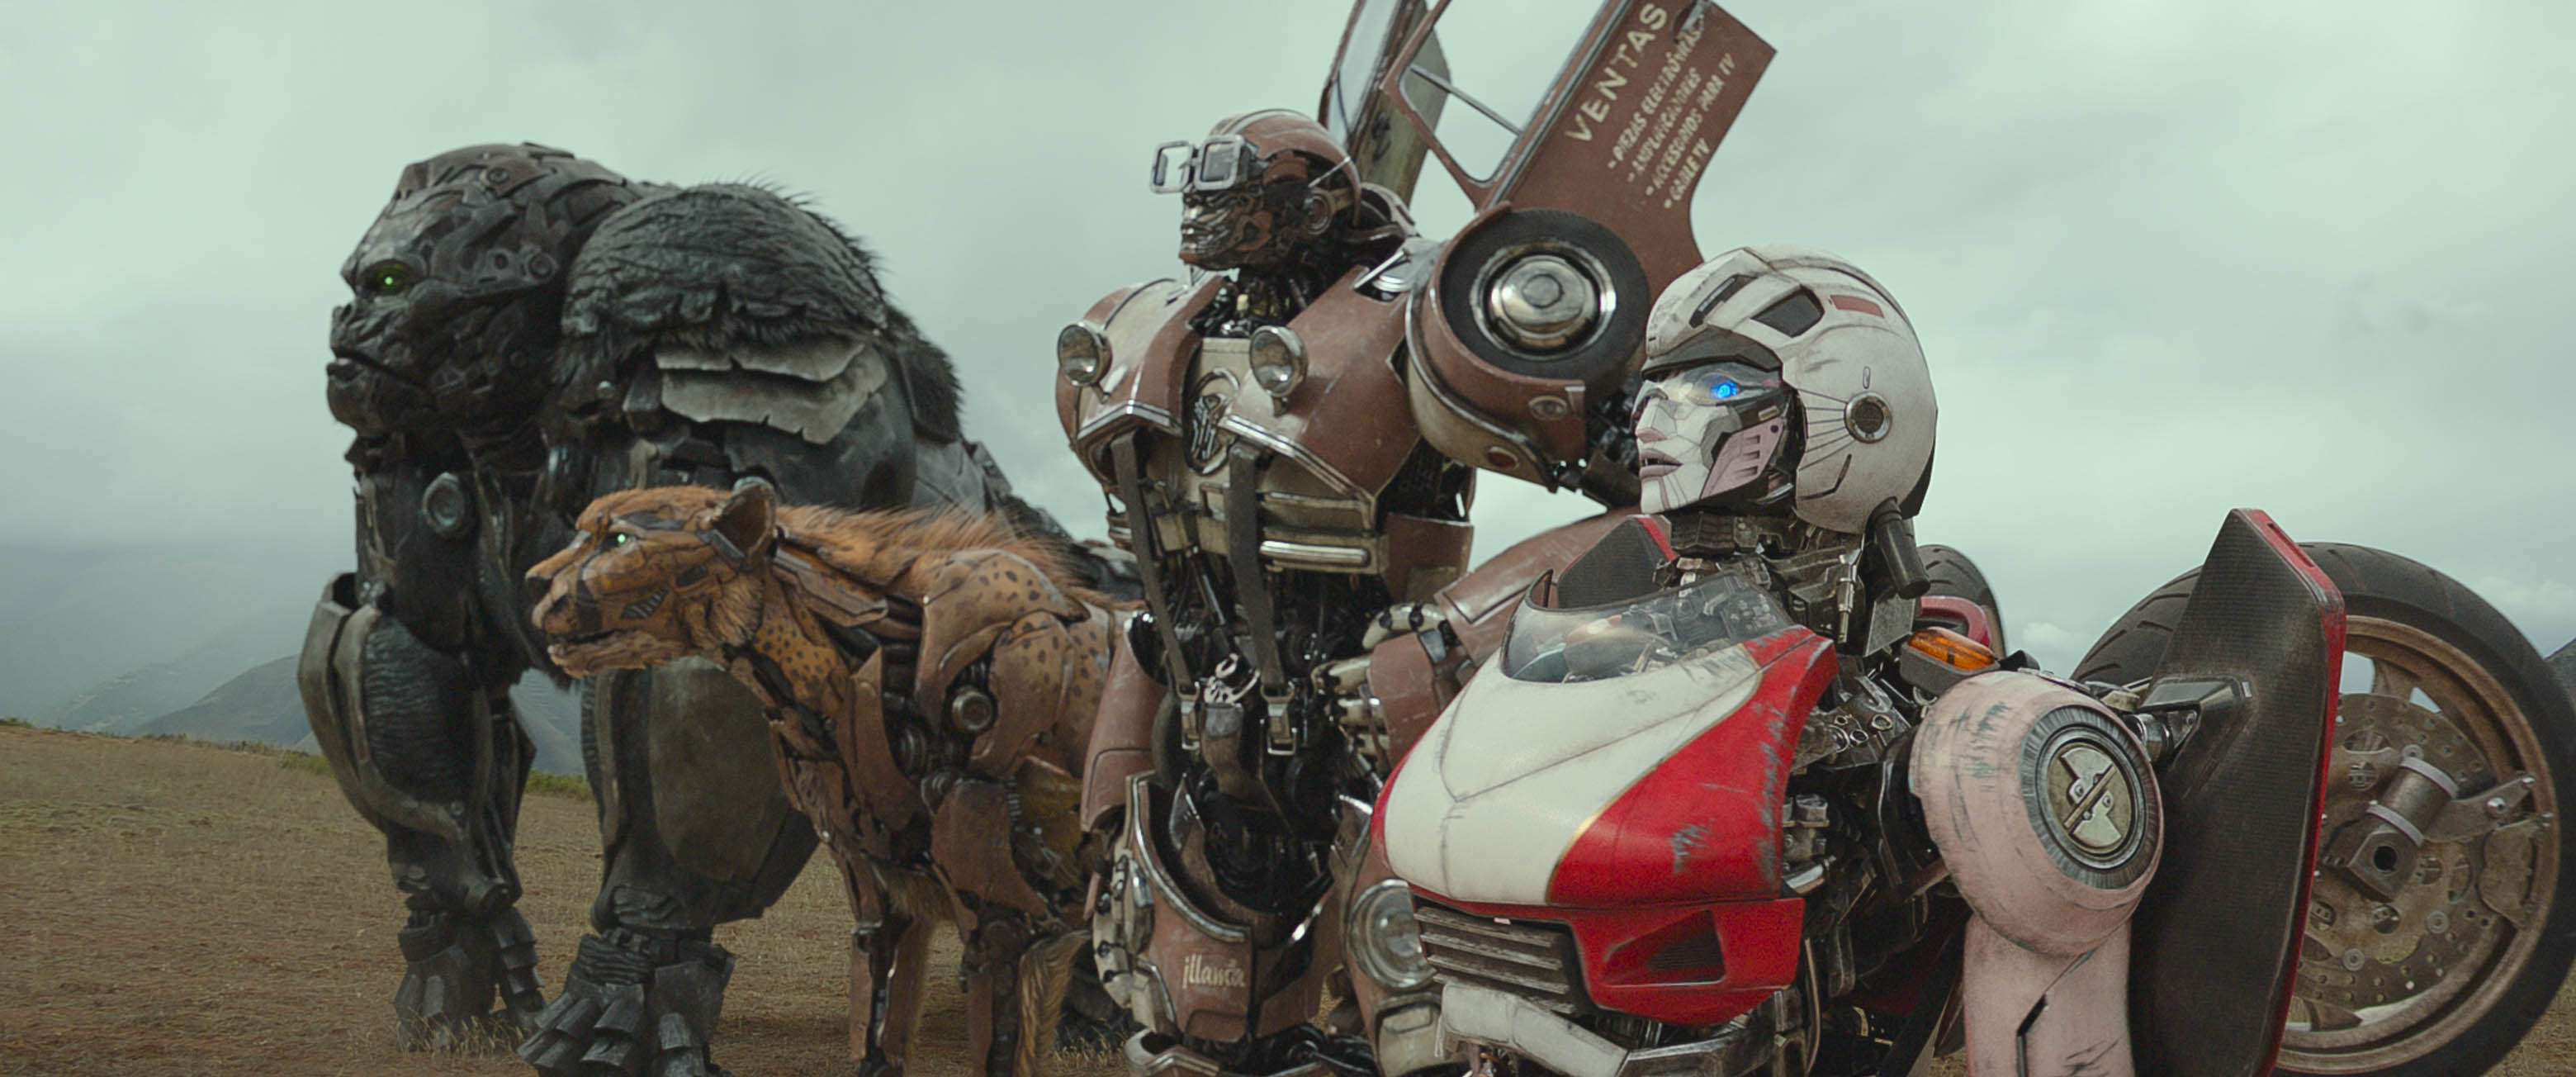 A group of sentient robots from Transformers: Rise of the Beasts (Optimus Primal, Cheetor, Wheeljack, and Arcee) stand together on a barren plain, facing off into the distance